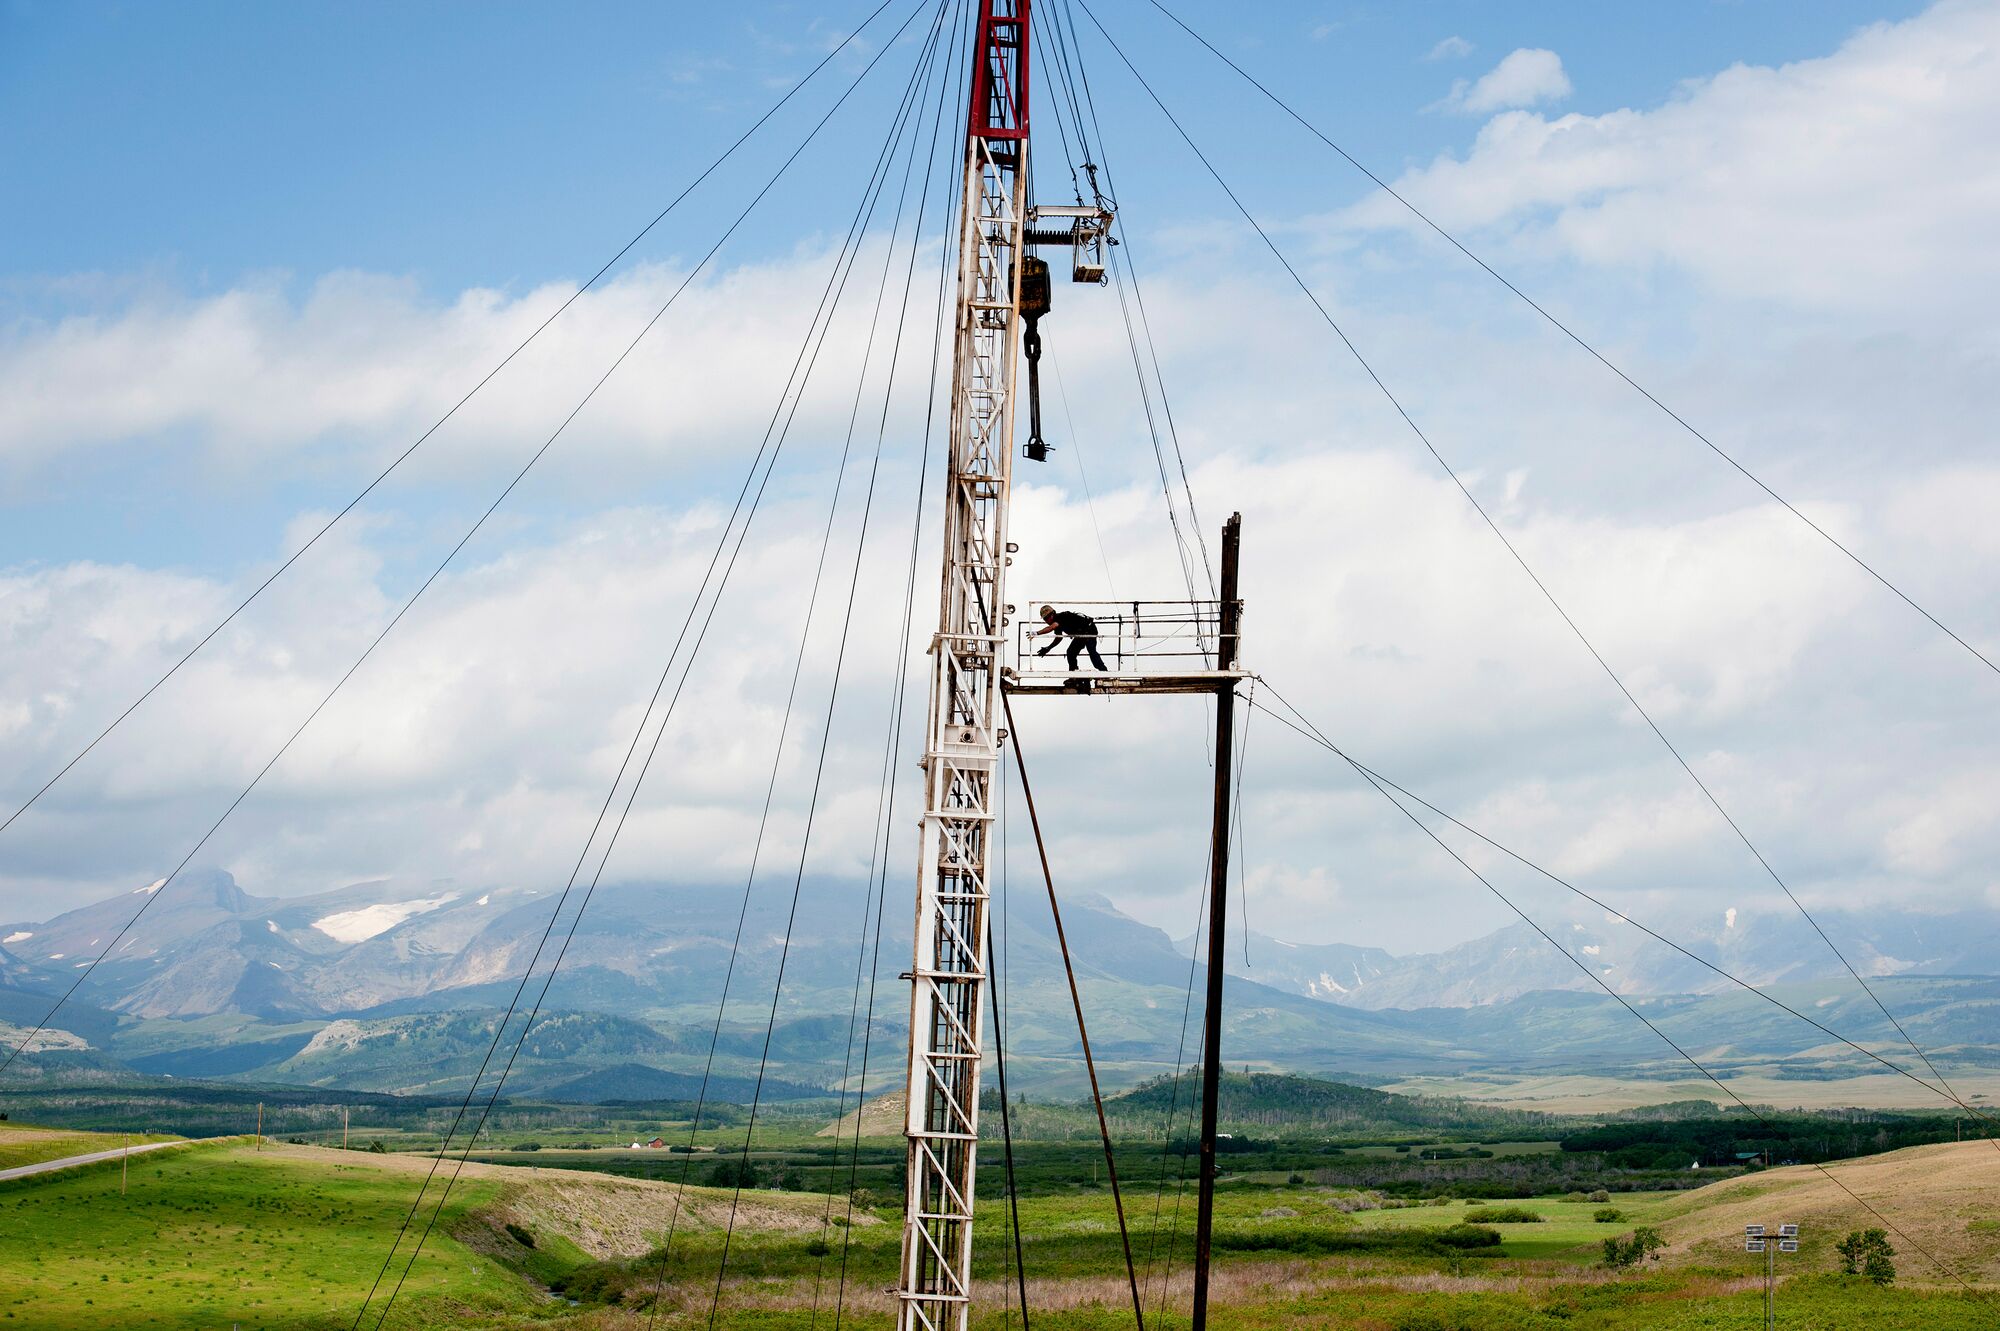 An Anschutz Exploration Corp. drilling site on the Blackfeet Indian Reservation near Browning, Montana, July 20, 2012. Certain parts of the reservation have been opened to drilling.